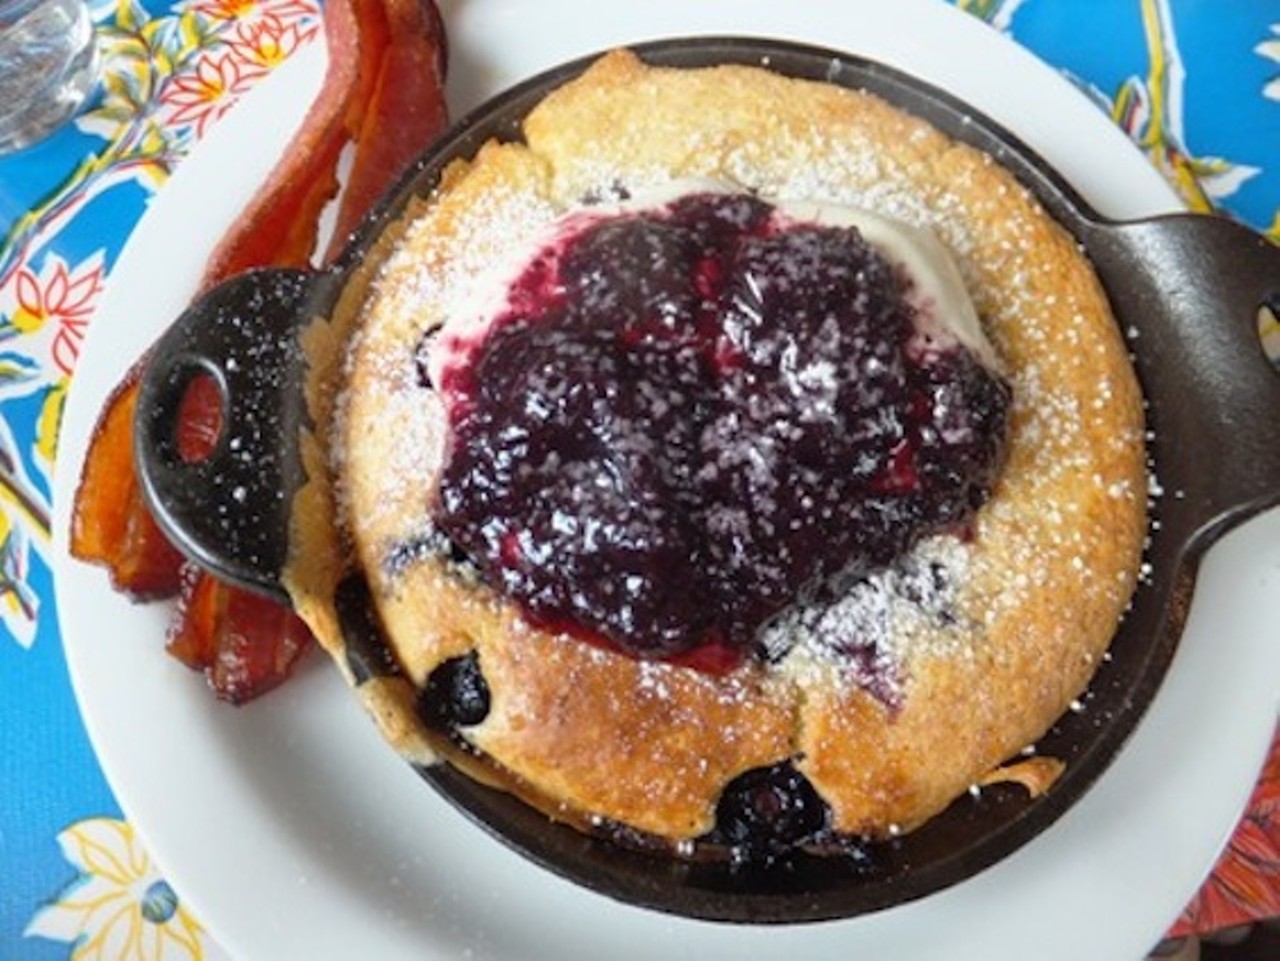 This Dutch pancake from Fort Defiance in Brooklyn, New York arrives in a piping-hot cast-iron pan, topped with warm blueberry compote, maple syrup and a dusting of powdered sugar. Sure, it's dessert for breakfast, but who's judging at brunch?